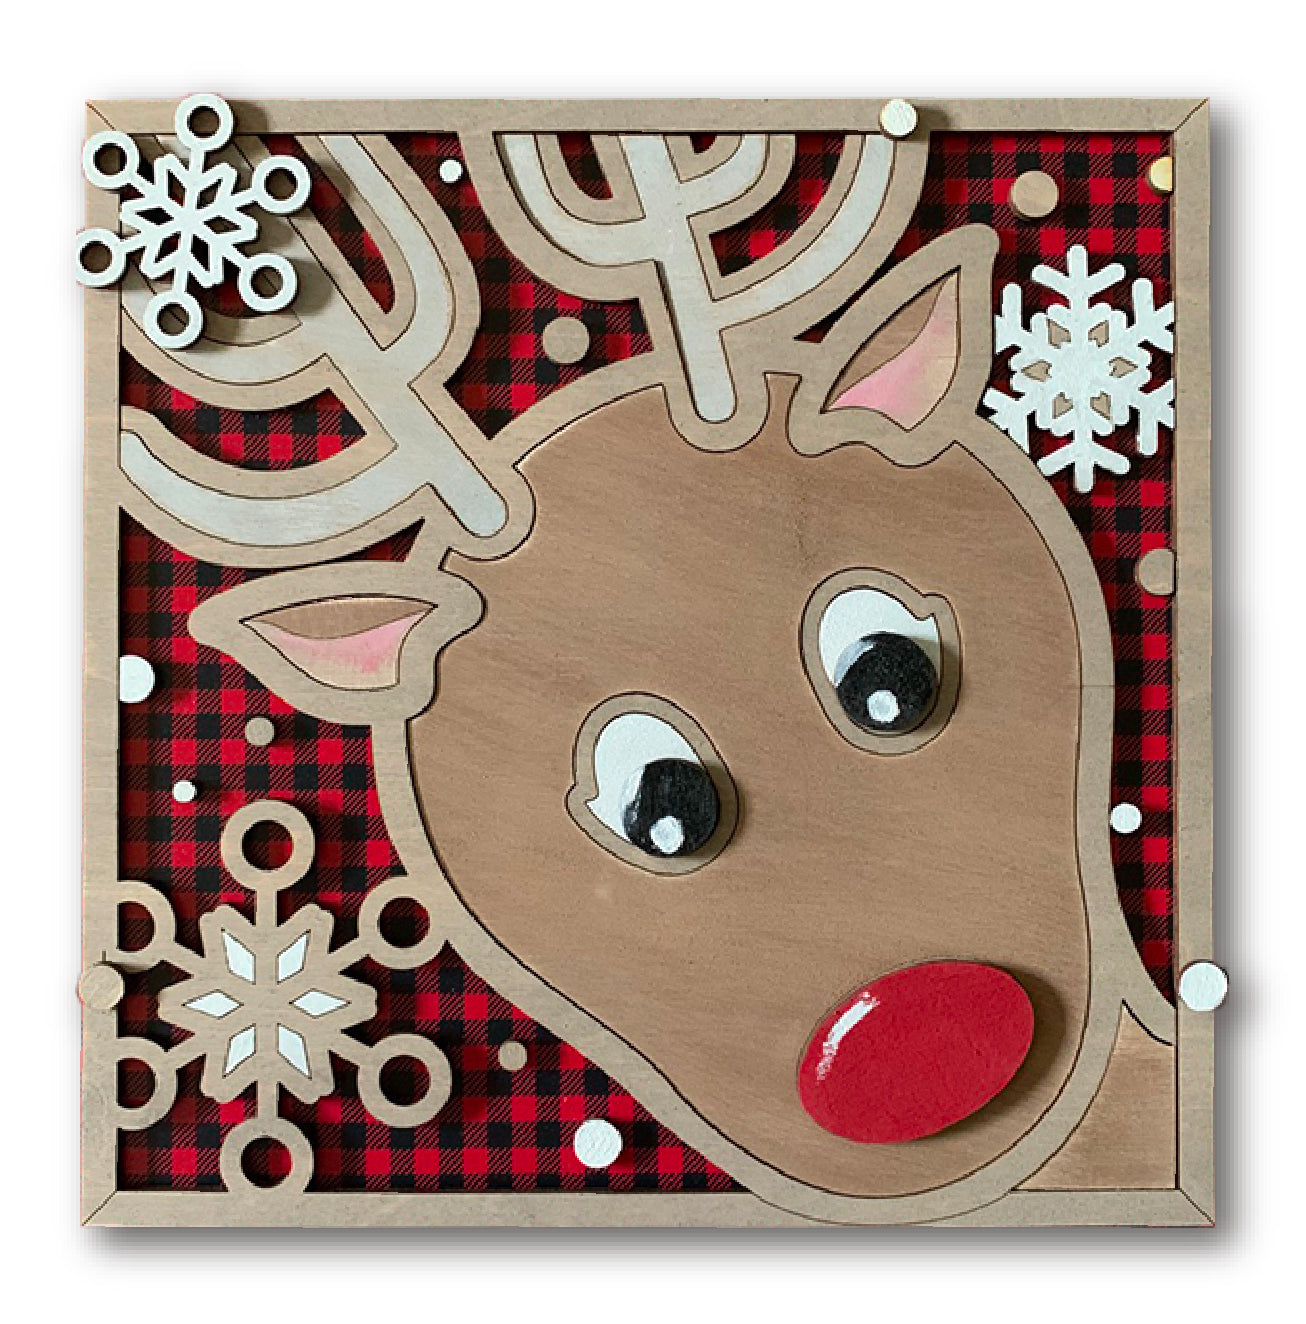 Reindeer Paint Puzzle Wall Art